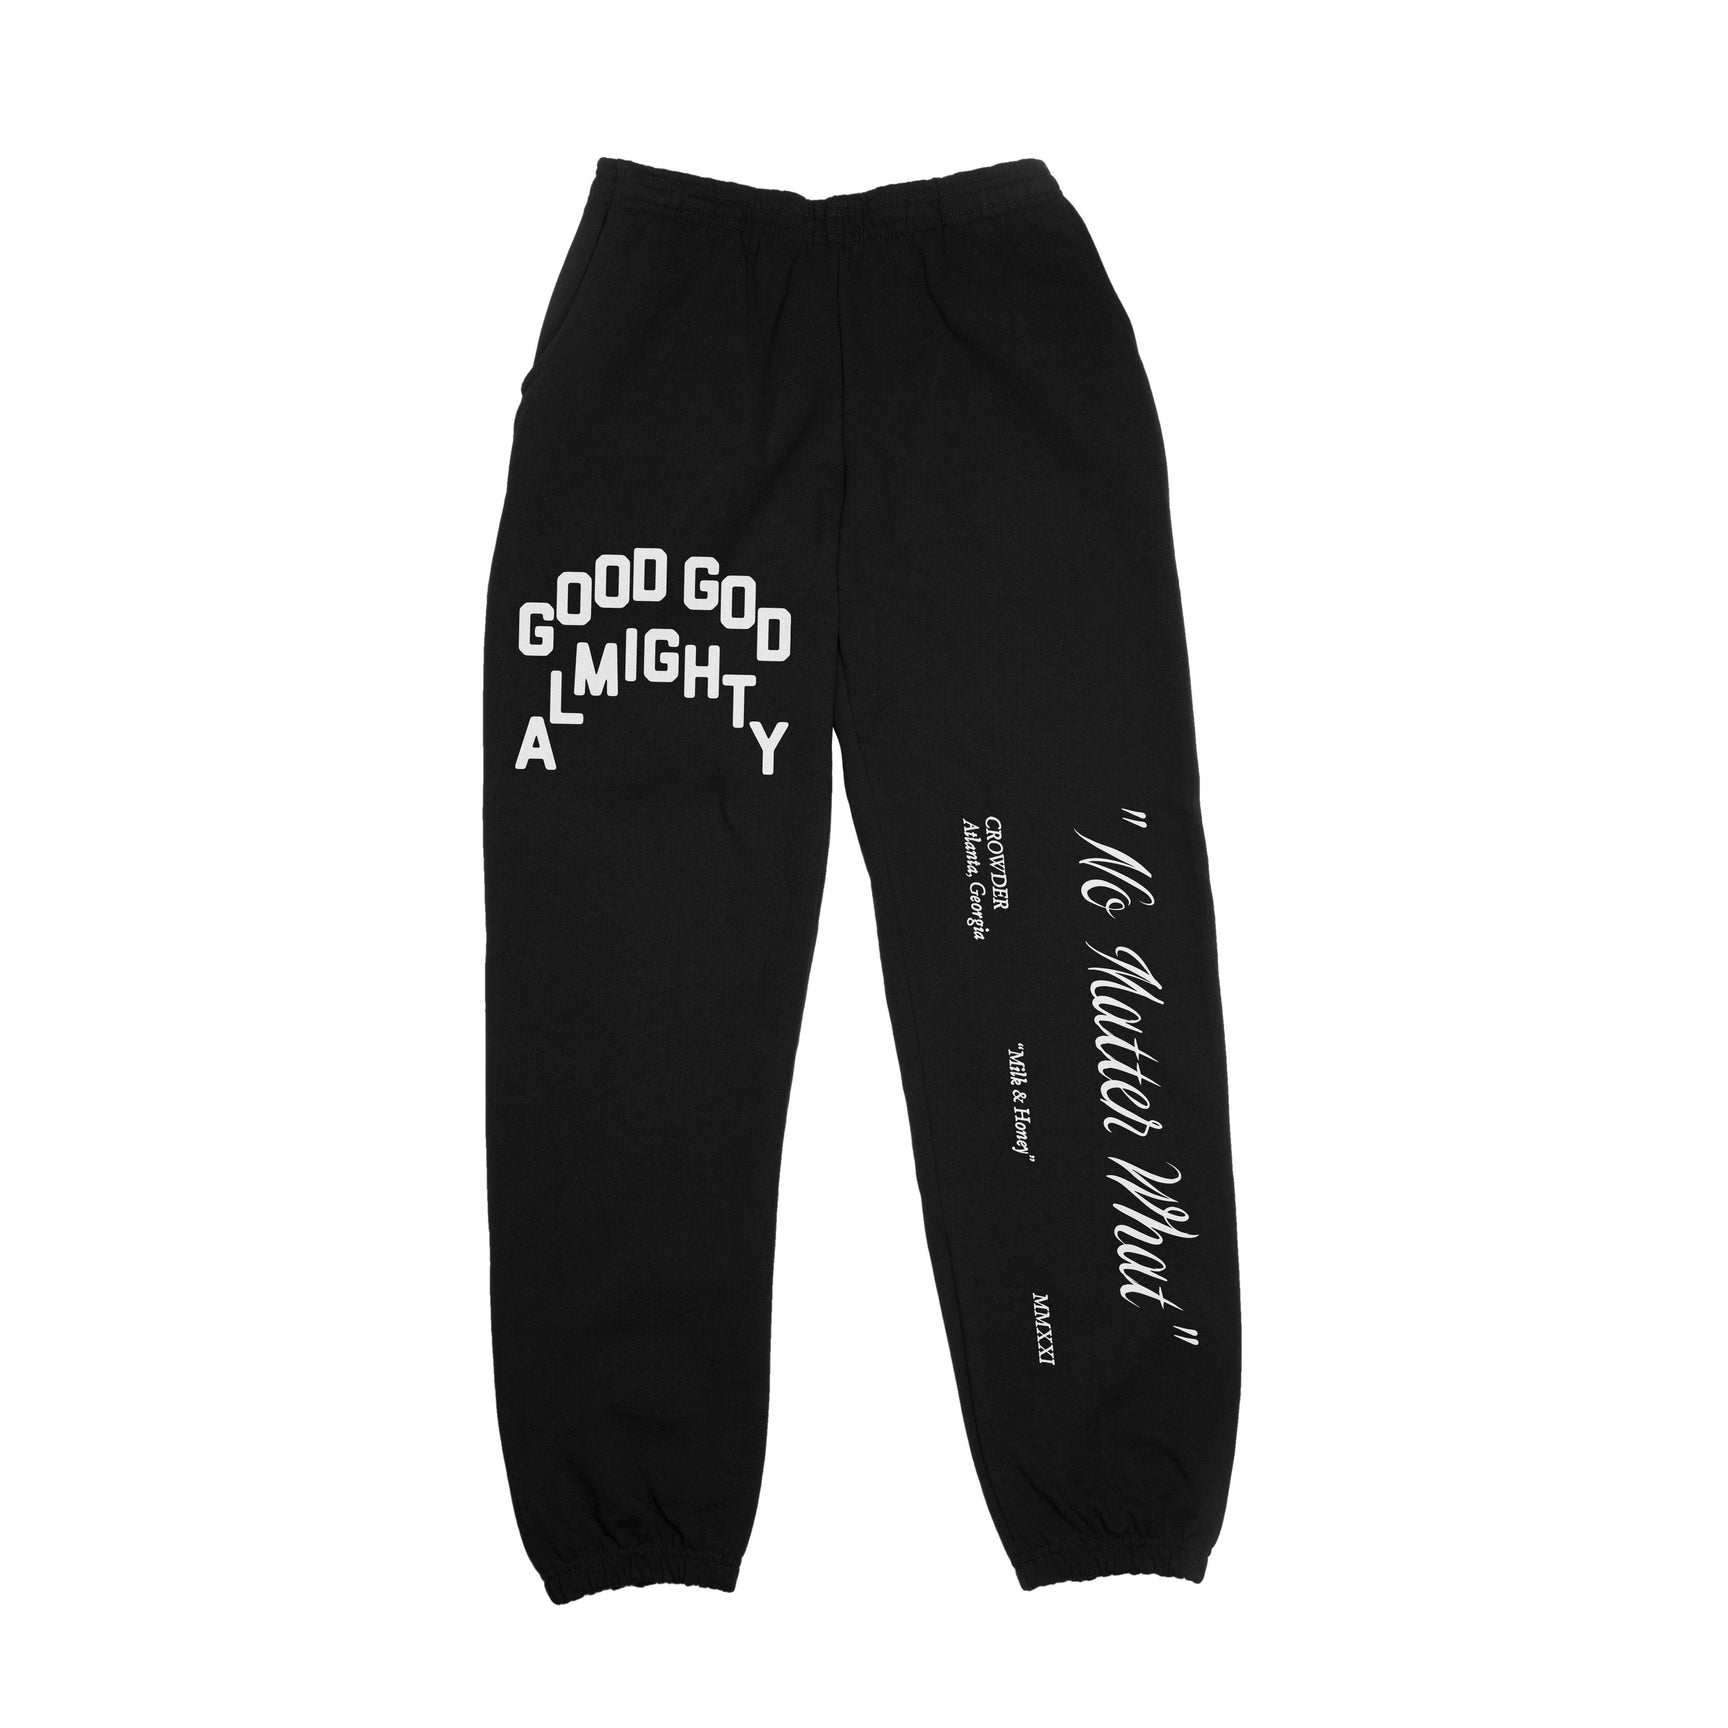 Good God Almighty Sweatpants – CROWDER GENERAL STORE